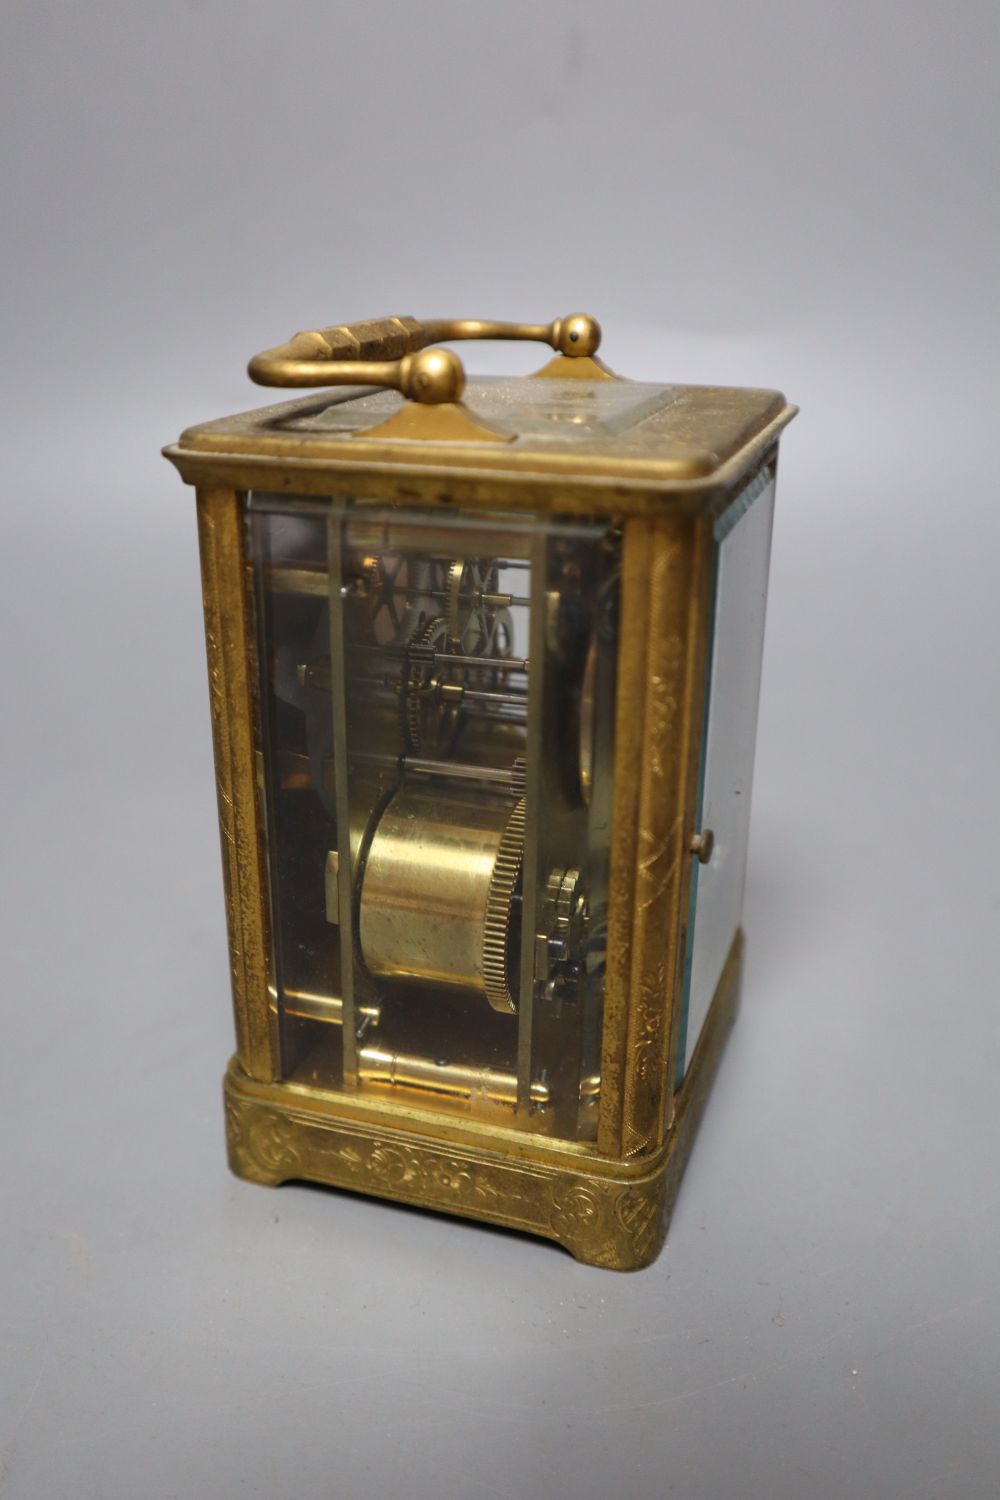 A Grohe of Paris carriage clock, two-train movement signed, with a key, 12.5cm